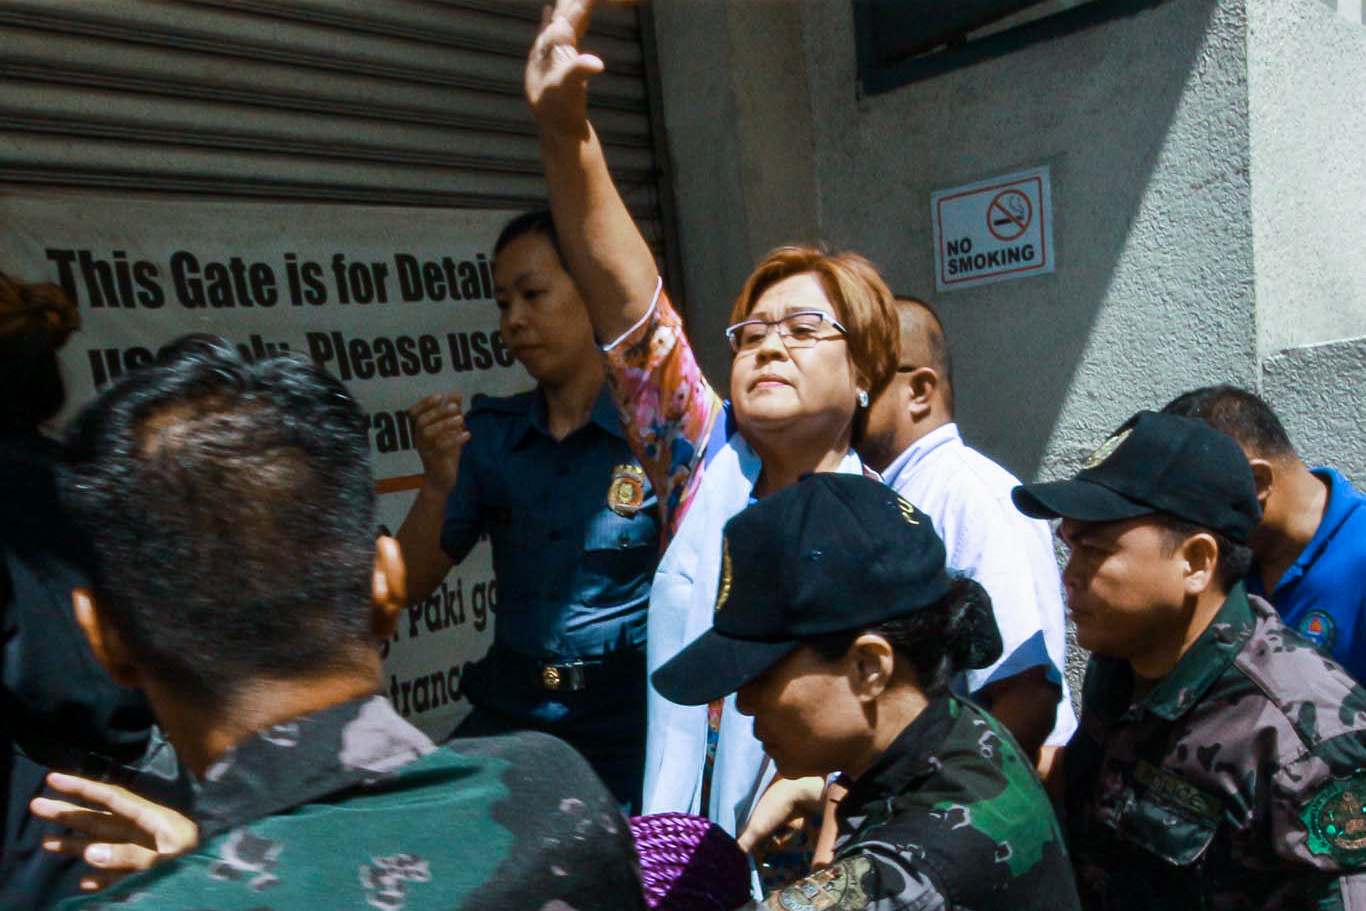 EMBATTLED. Senator Leila de Lima attends a hearing on the case filed against her for disobedience to summons at the Quezon City Metropolitan Trial Court on May 19, 2017. File photo by Darren Langit/Rappler 